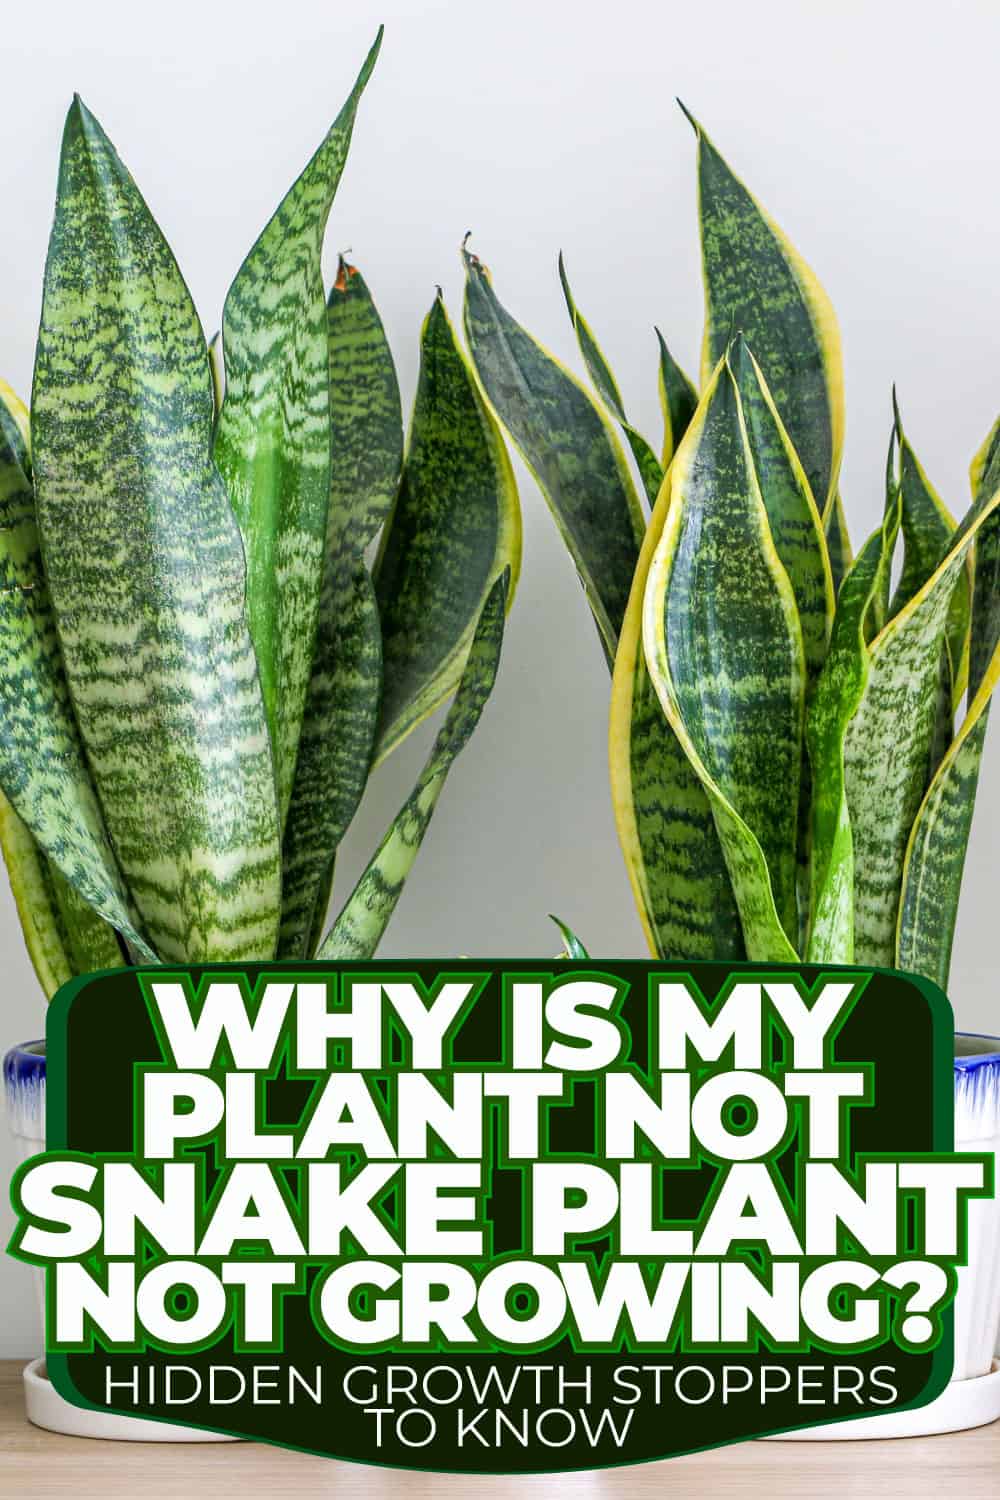 Why Is My Snake Plant Not Growing? Hidden Growth Stoppers To Know